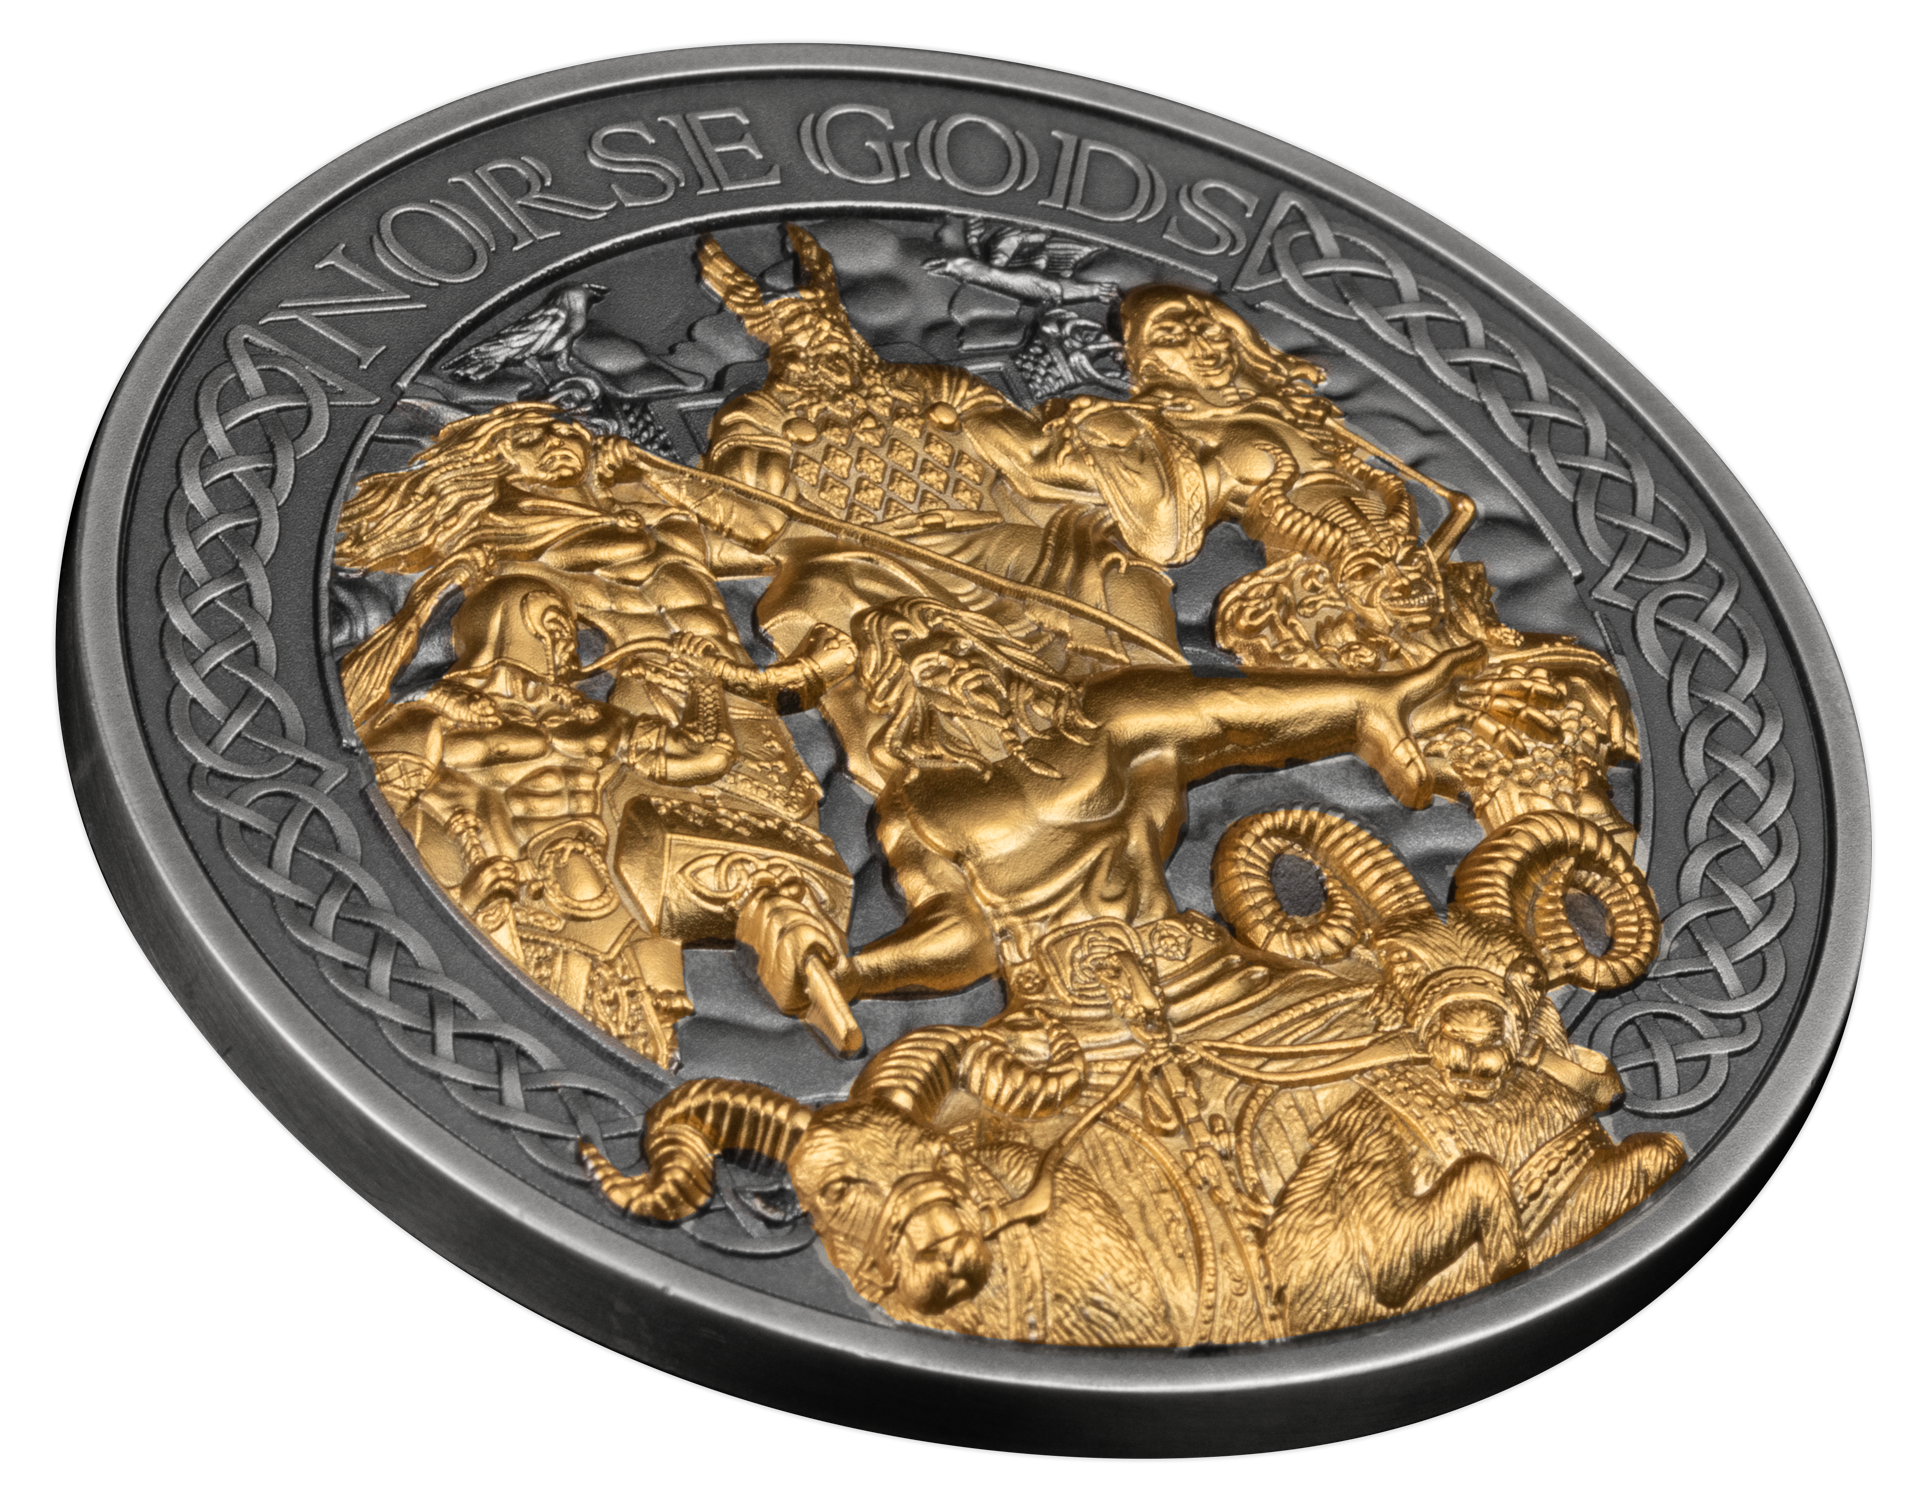 THE AESIR Norse Gods Gold Plating 5 Oz Silver Coin $25 Cook Islands 2024